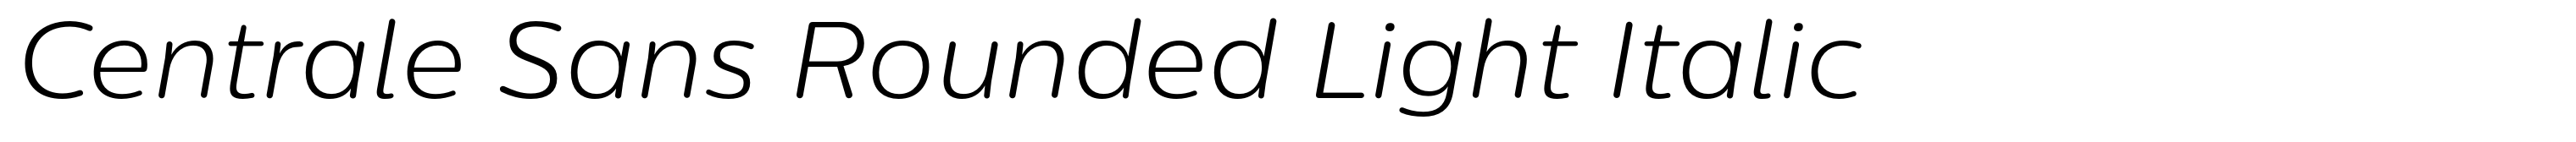 Centrale Sans Rounded Light Italic